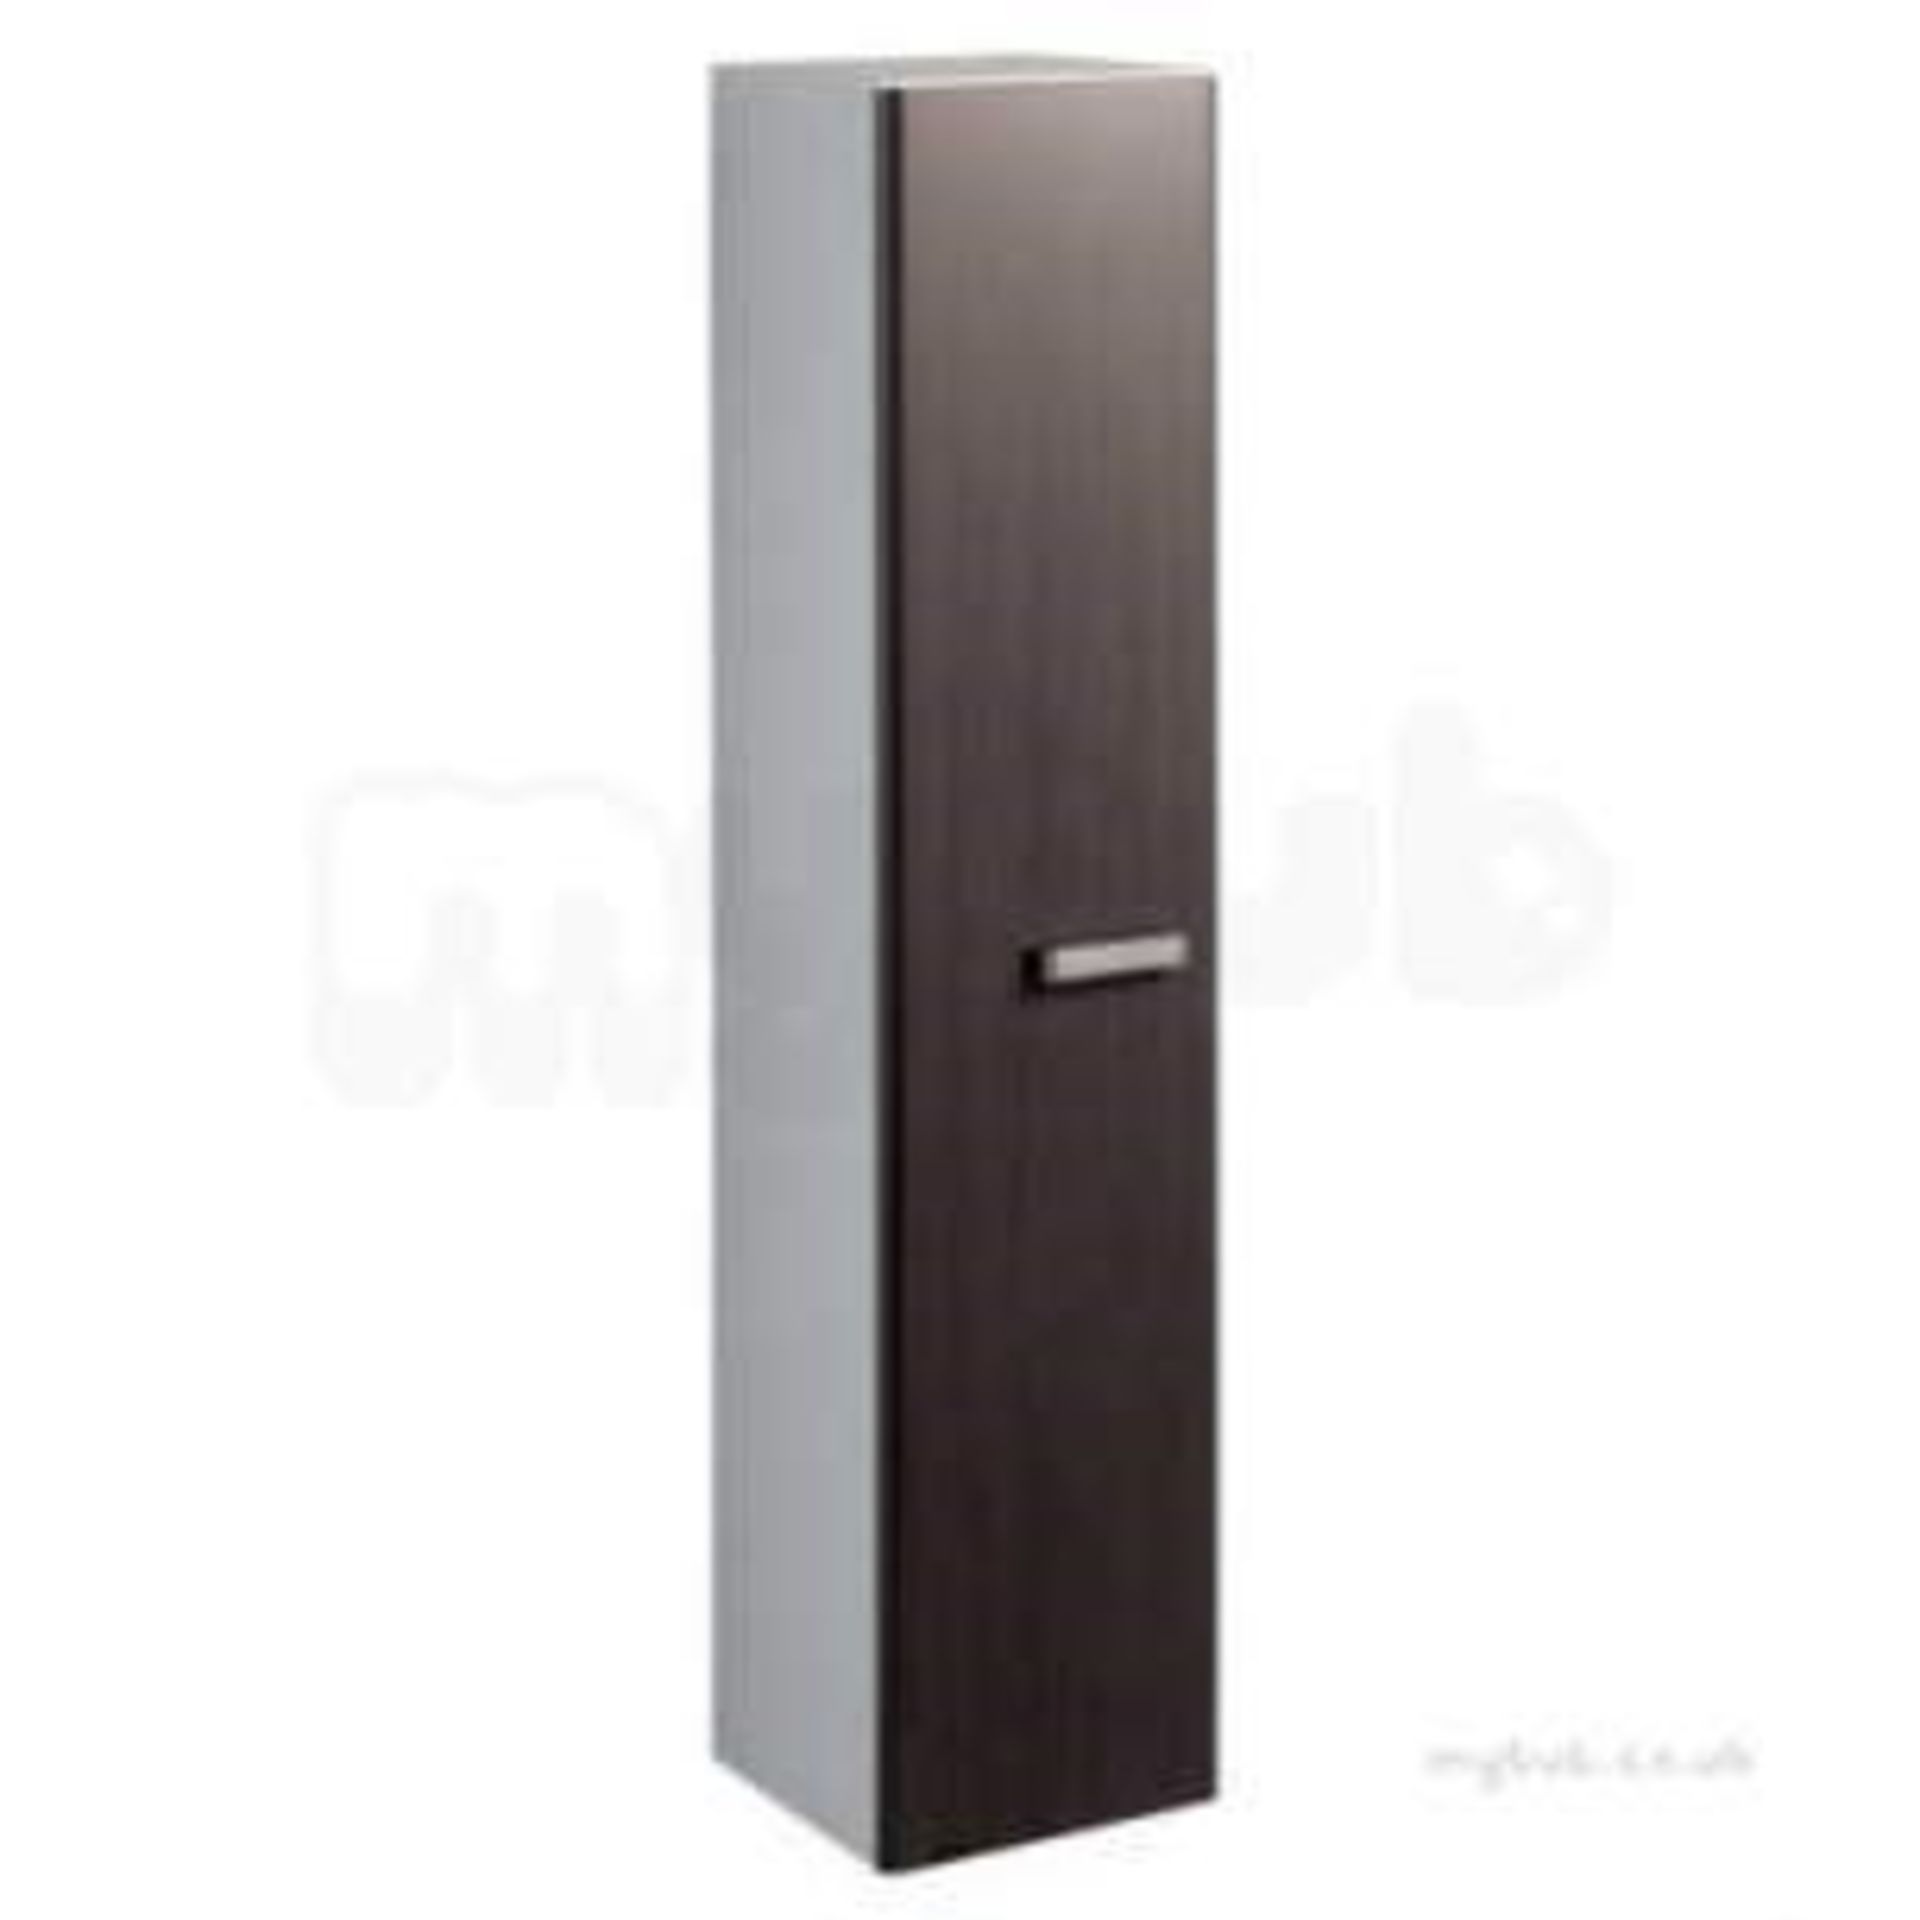 (KN64) Twyford 1730mm Galerie Plan Wenge Tall Furniture Unit. RRP £666.99.Wenge gloss finish ...